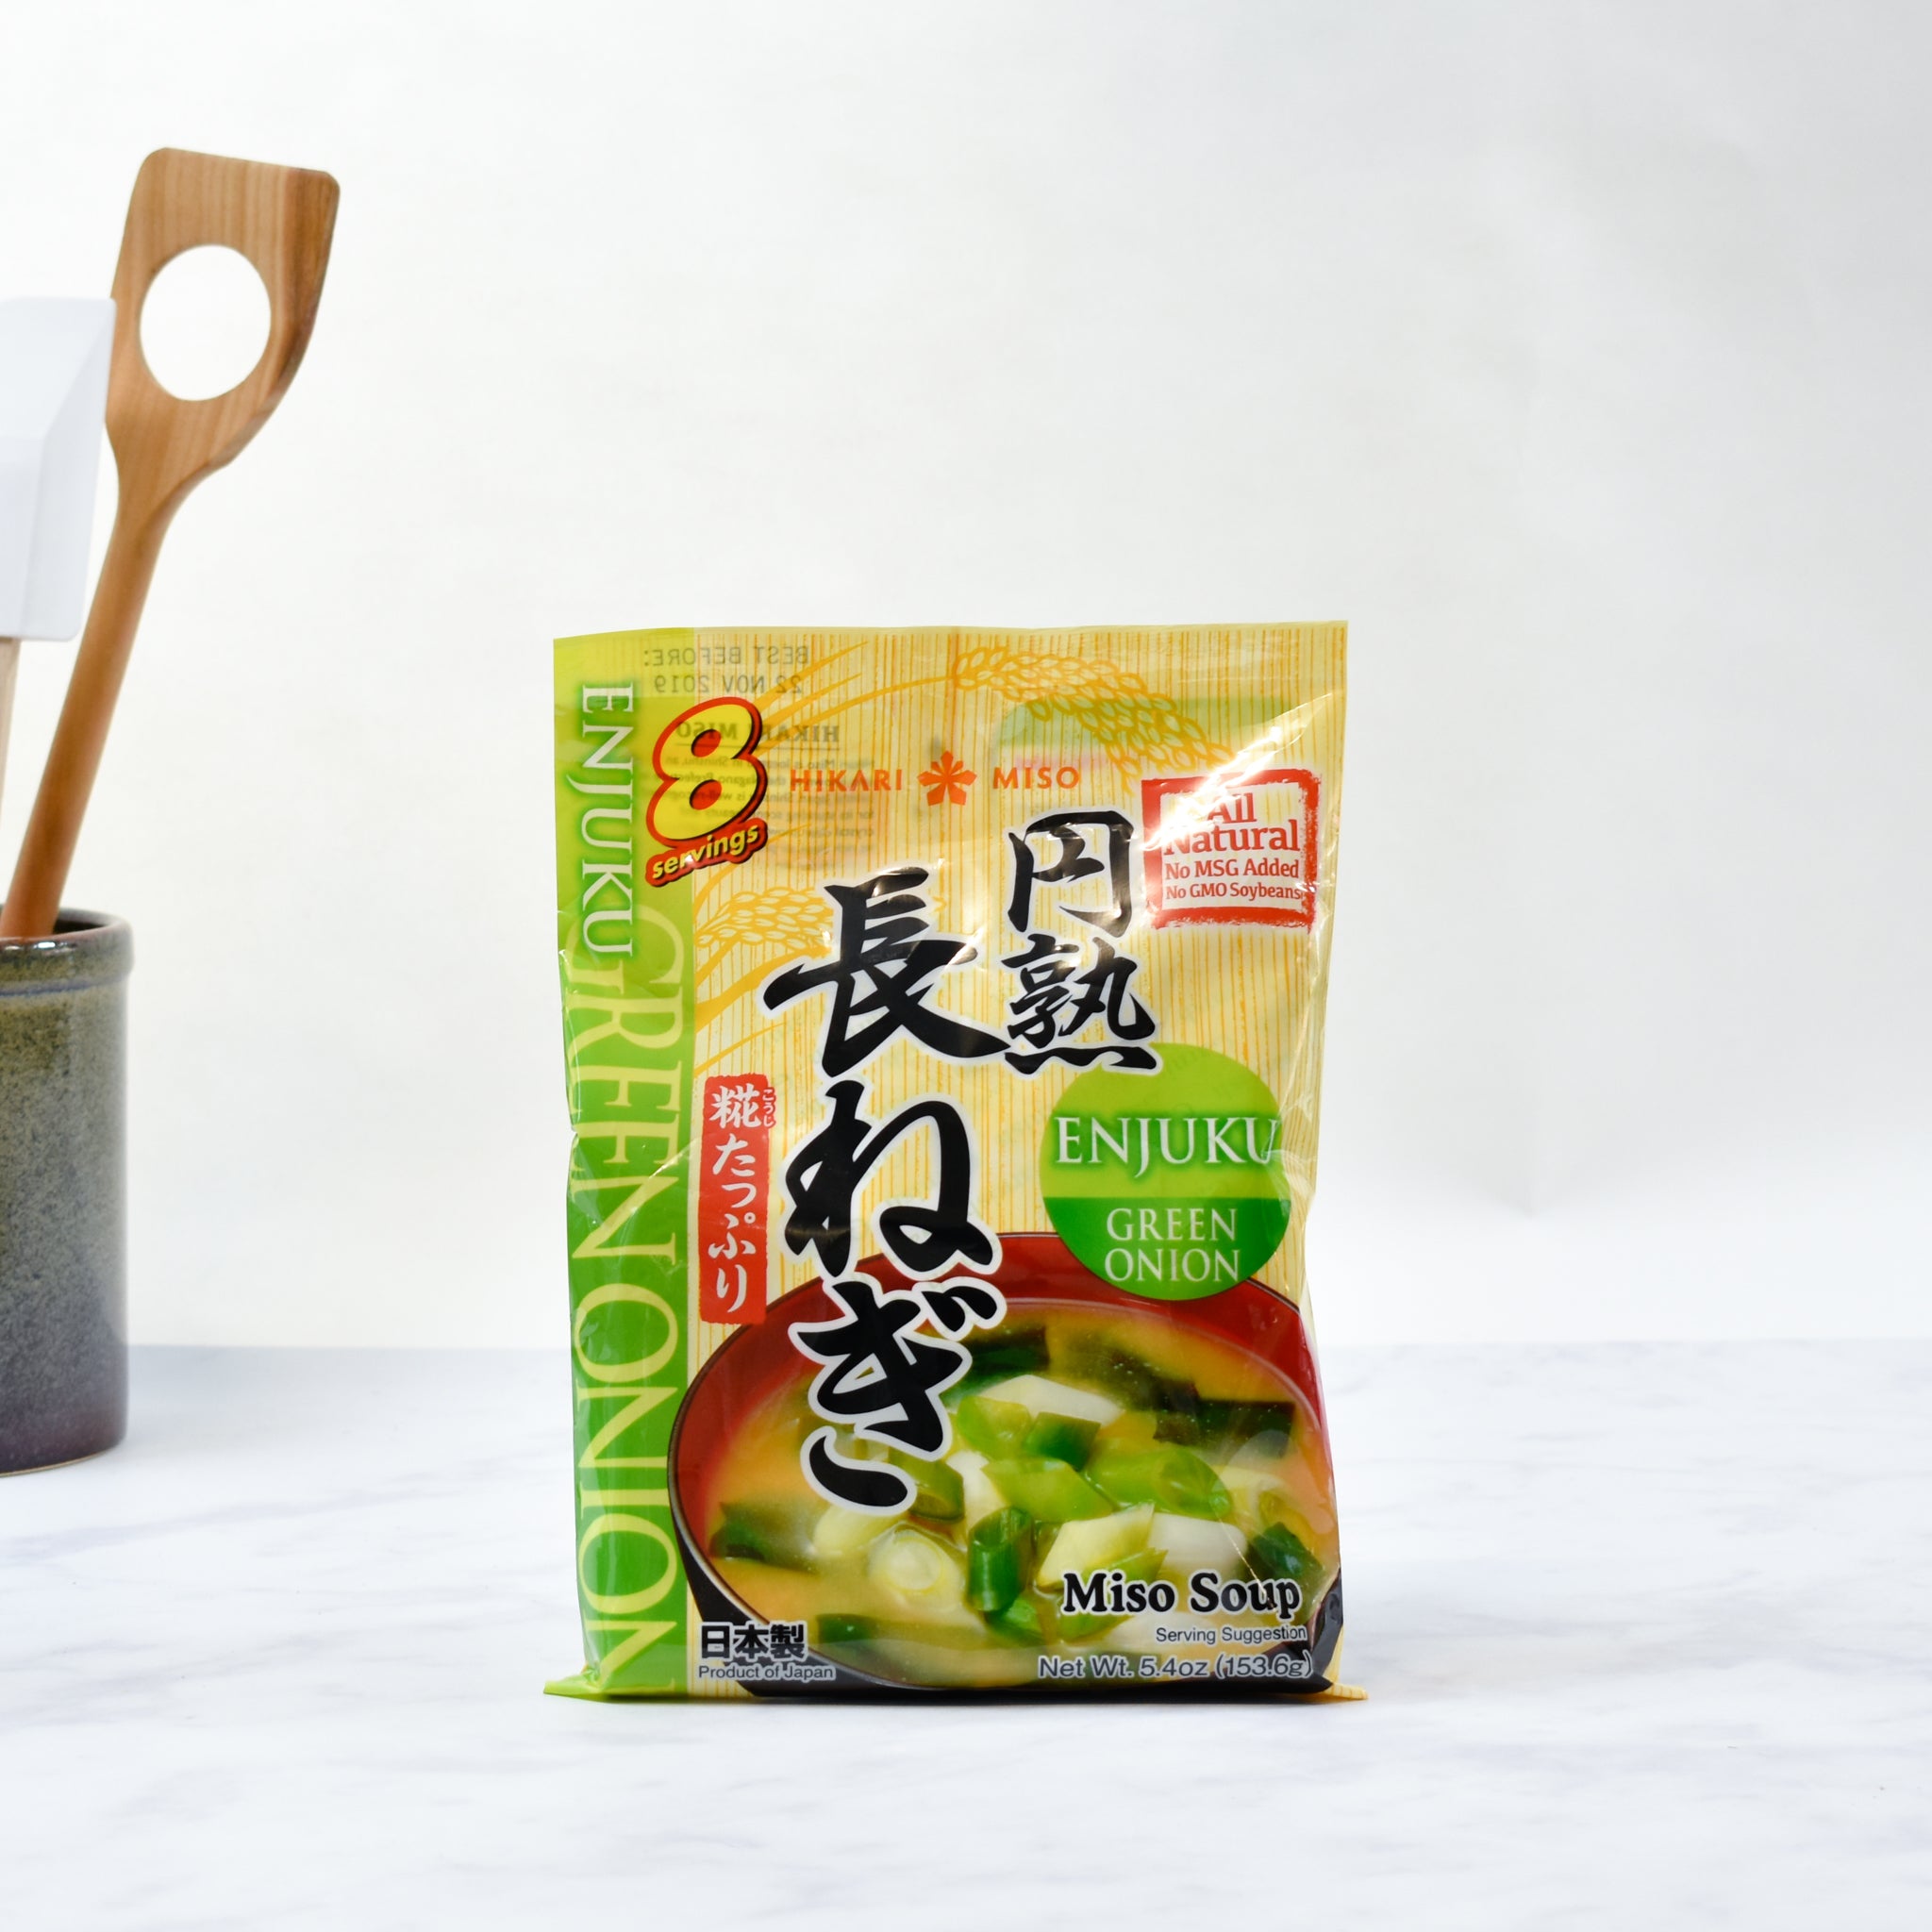 Instant Miso Soup With Green Onion, 8 x 22g servings